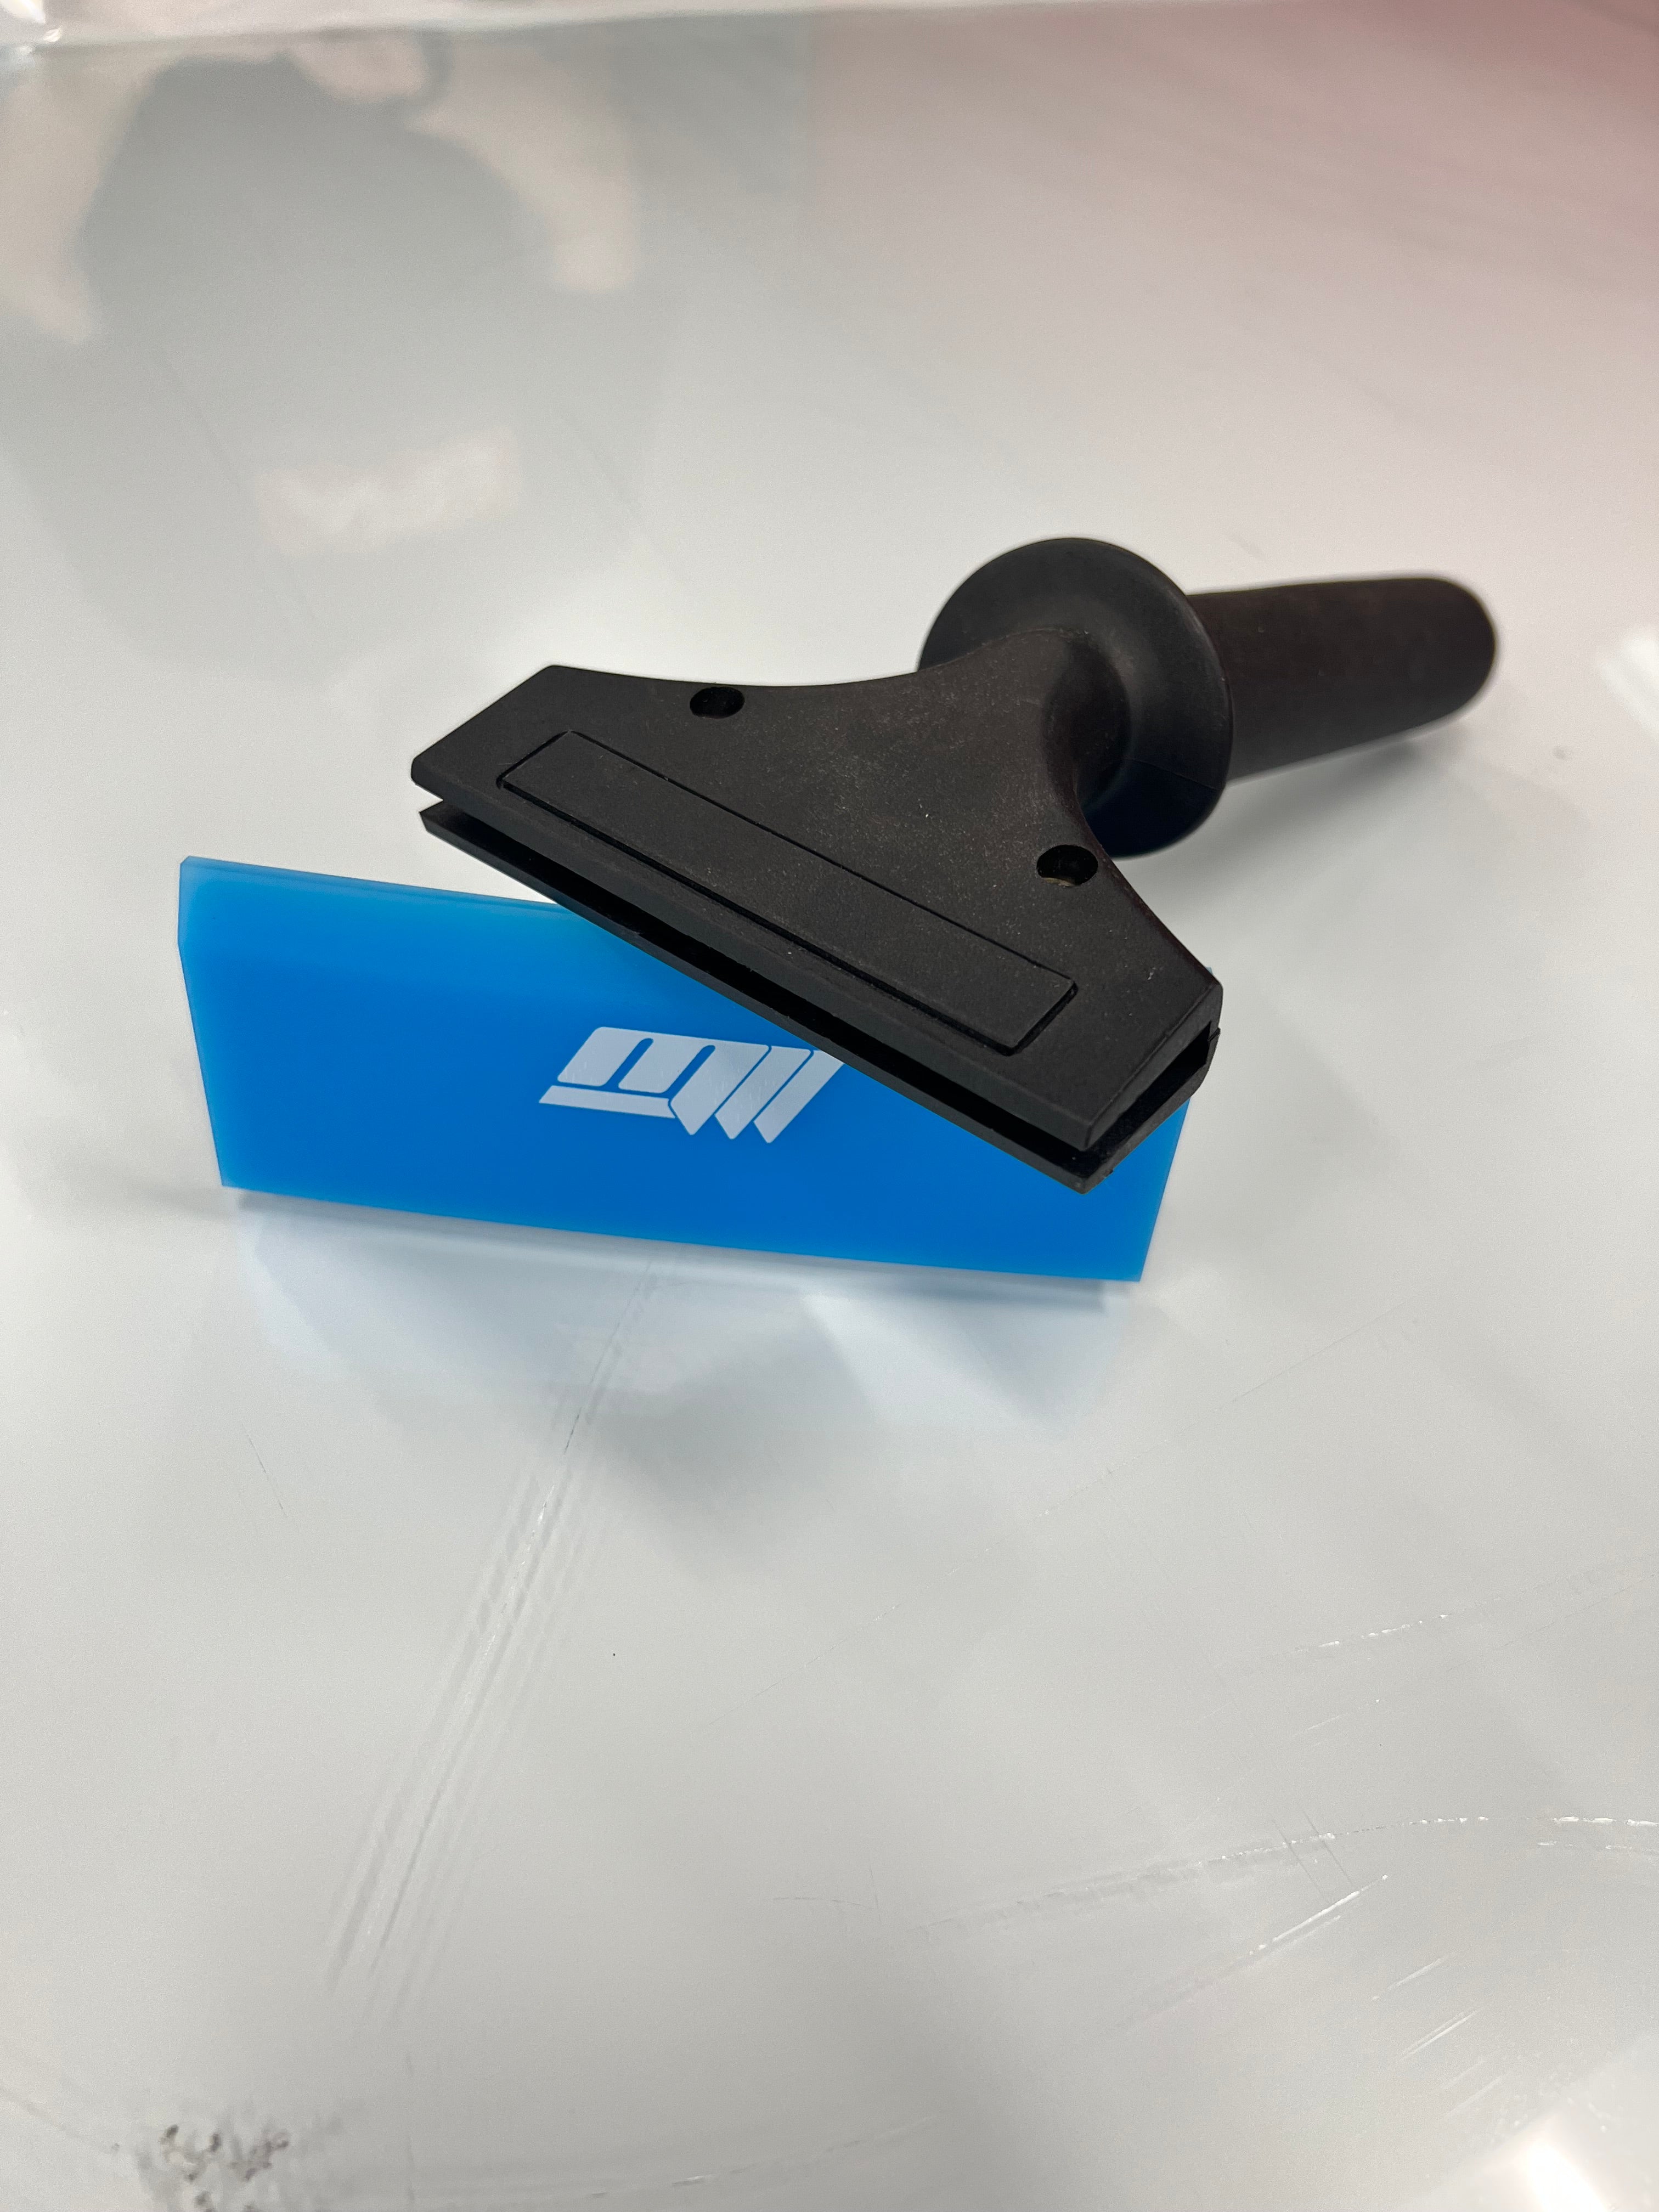 Squeegee Handle